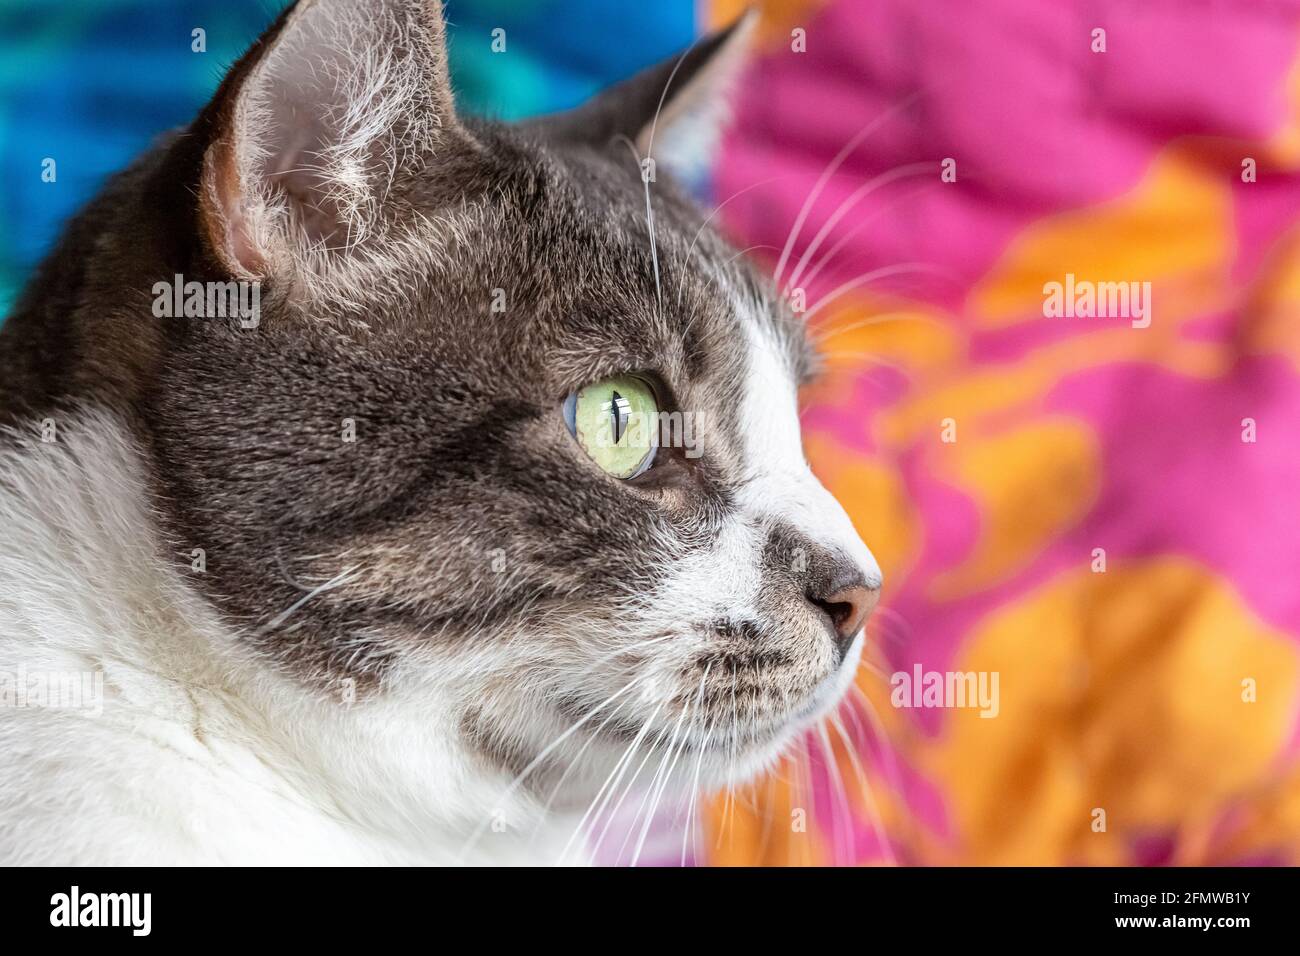 Profile of a Domestic Shorthair, striped grey and white tabby cat. Stock Photo